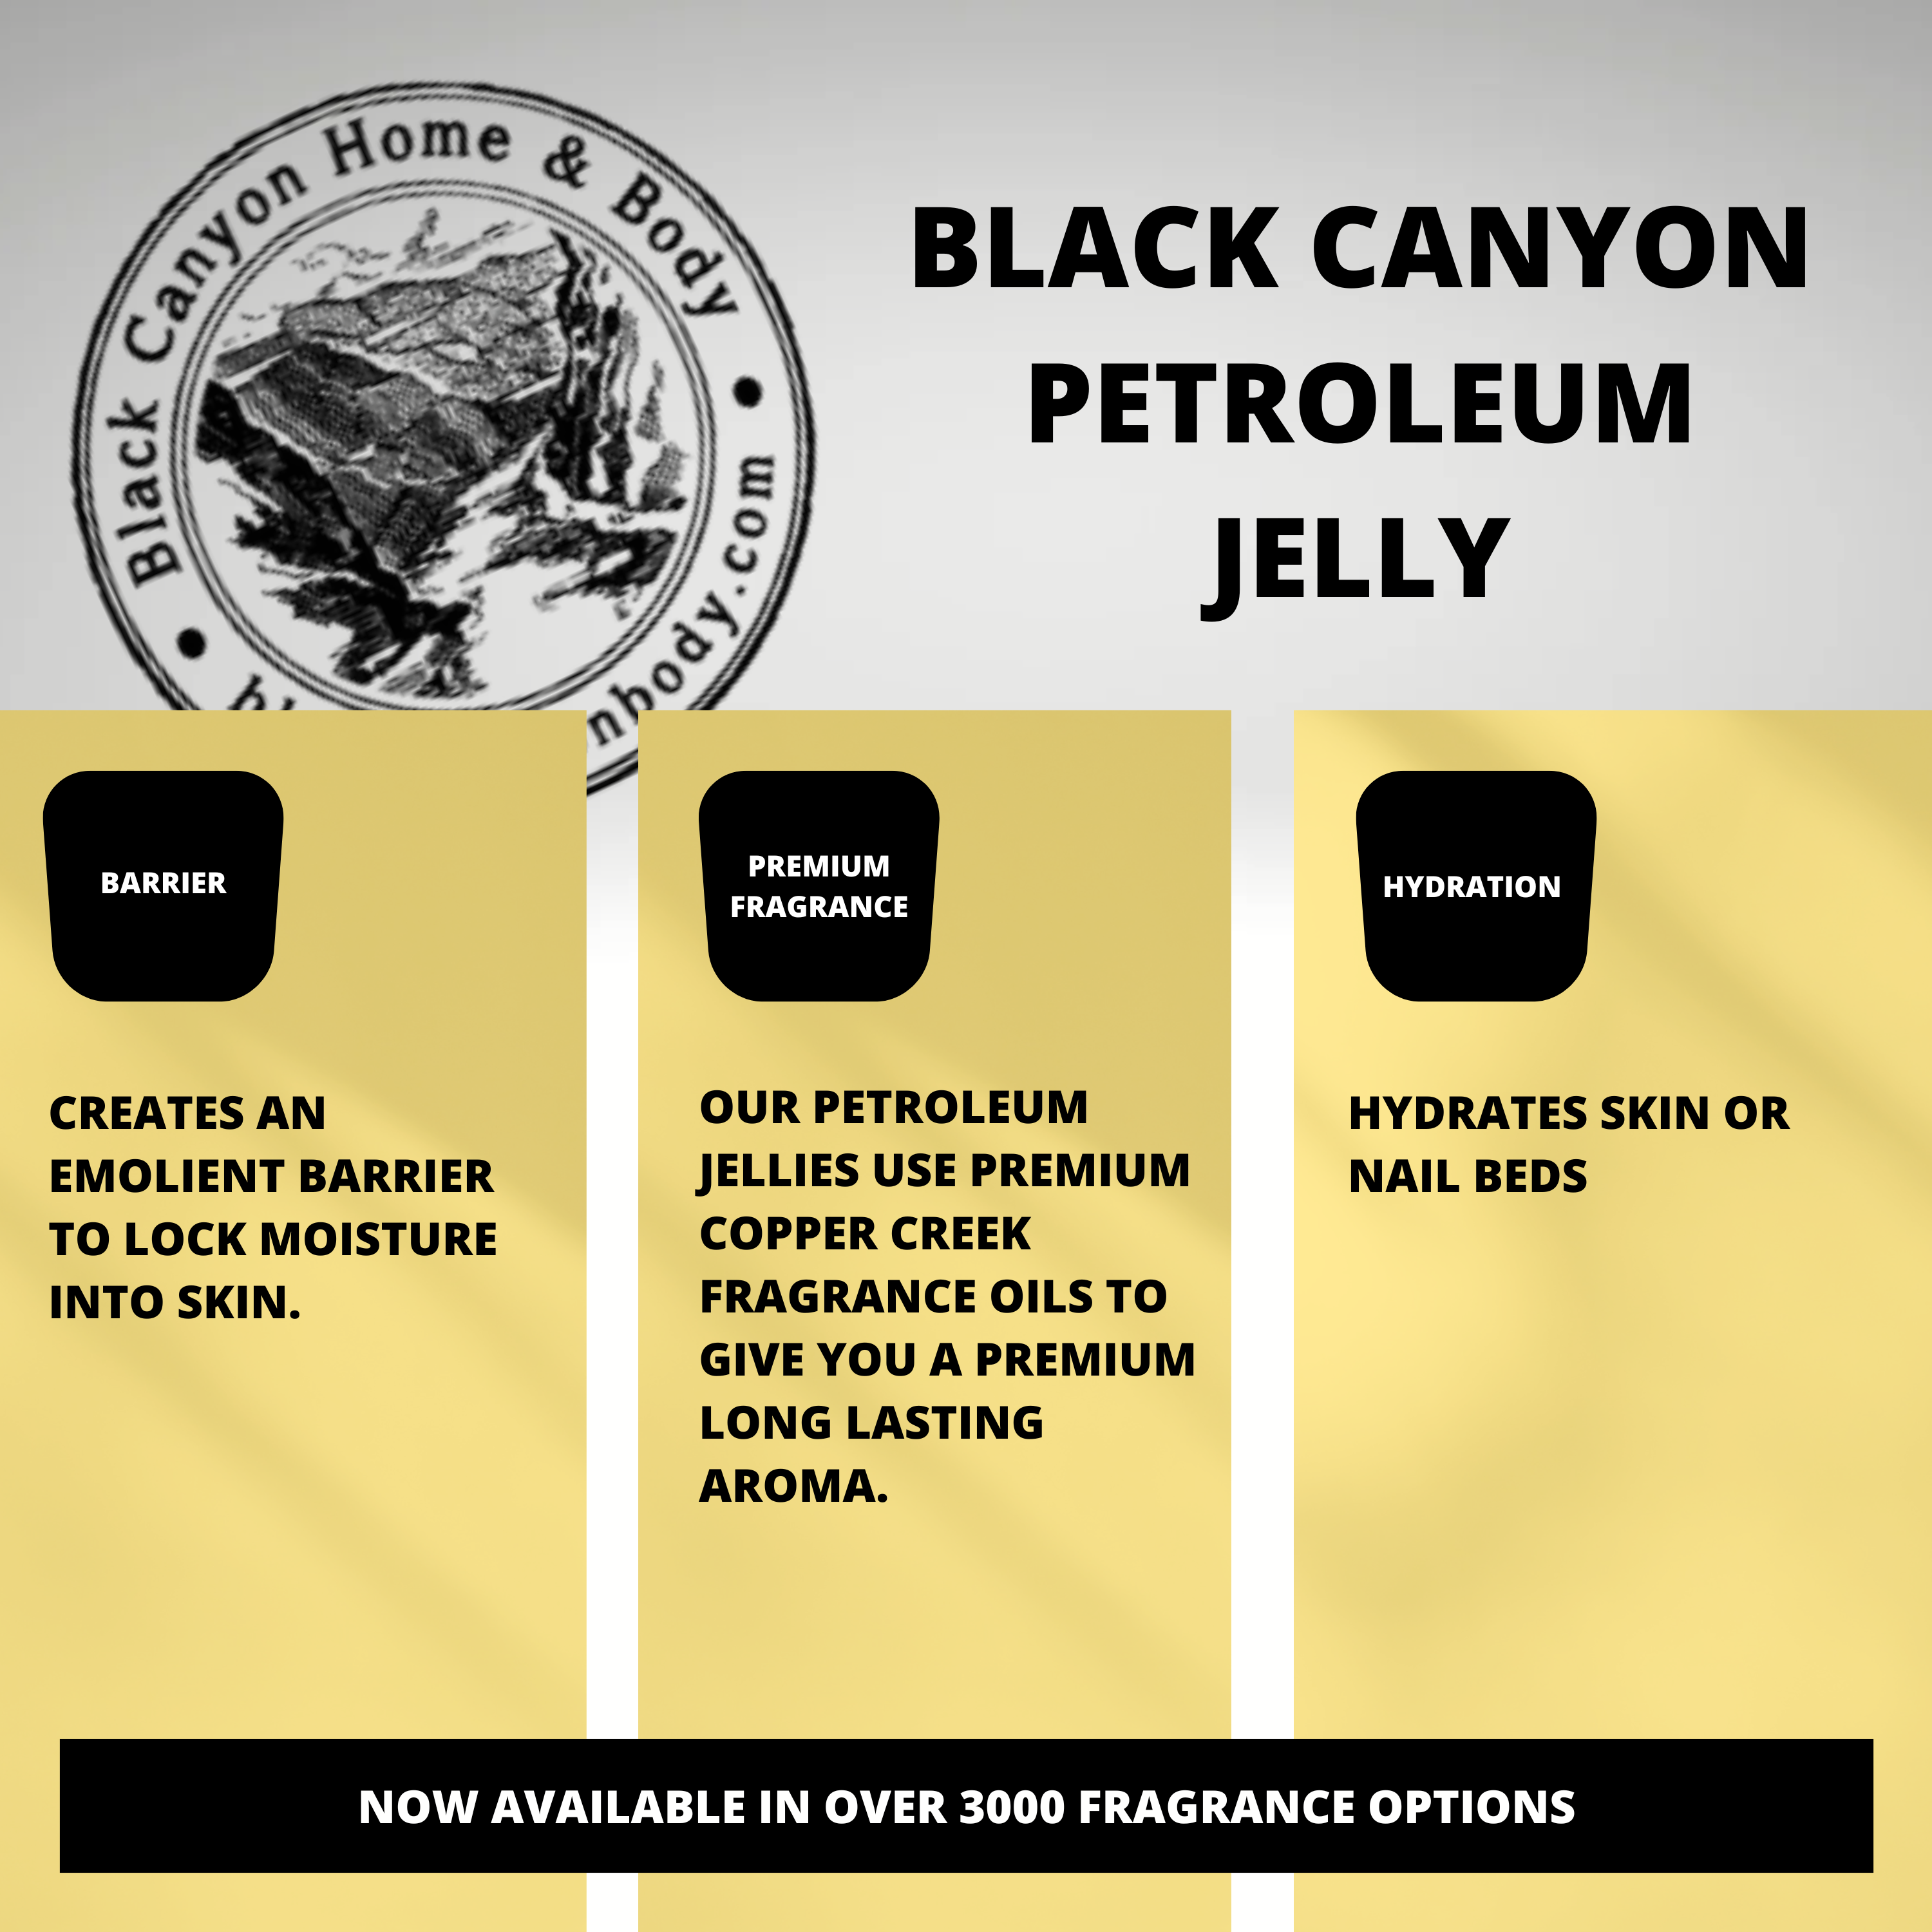 Black Canyon Blackberry Scented Petroleum Jelly